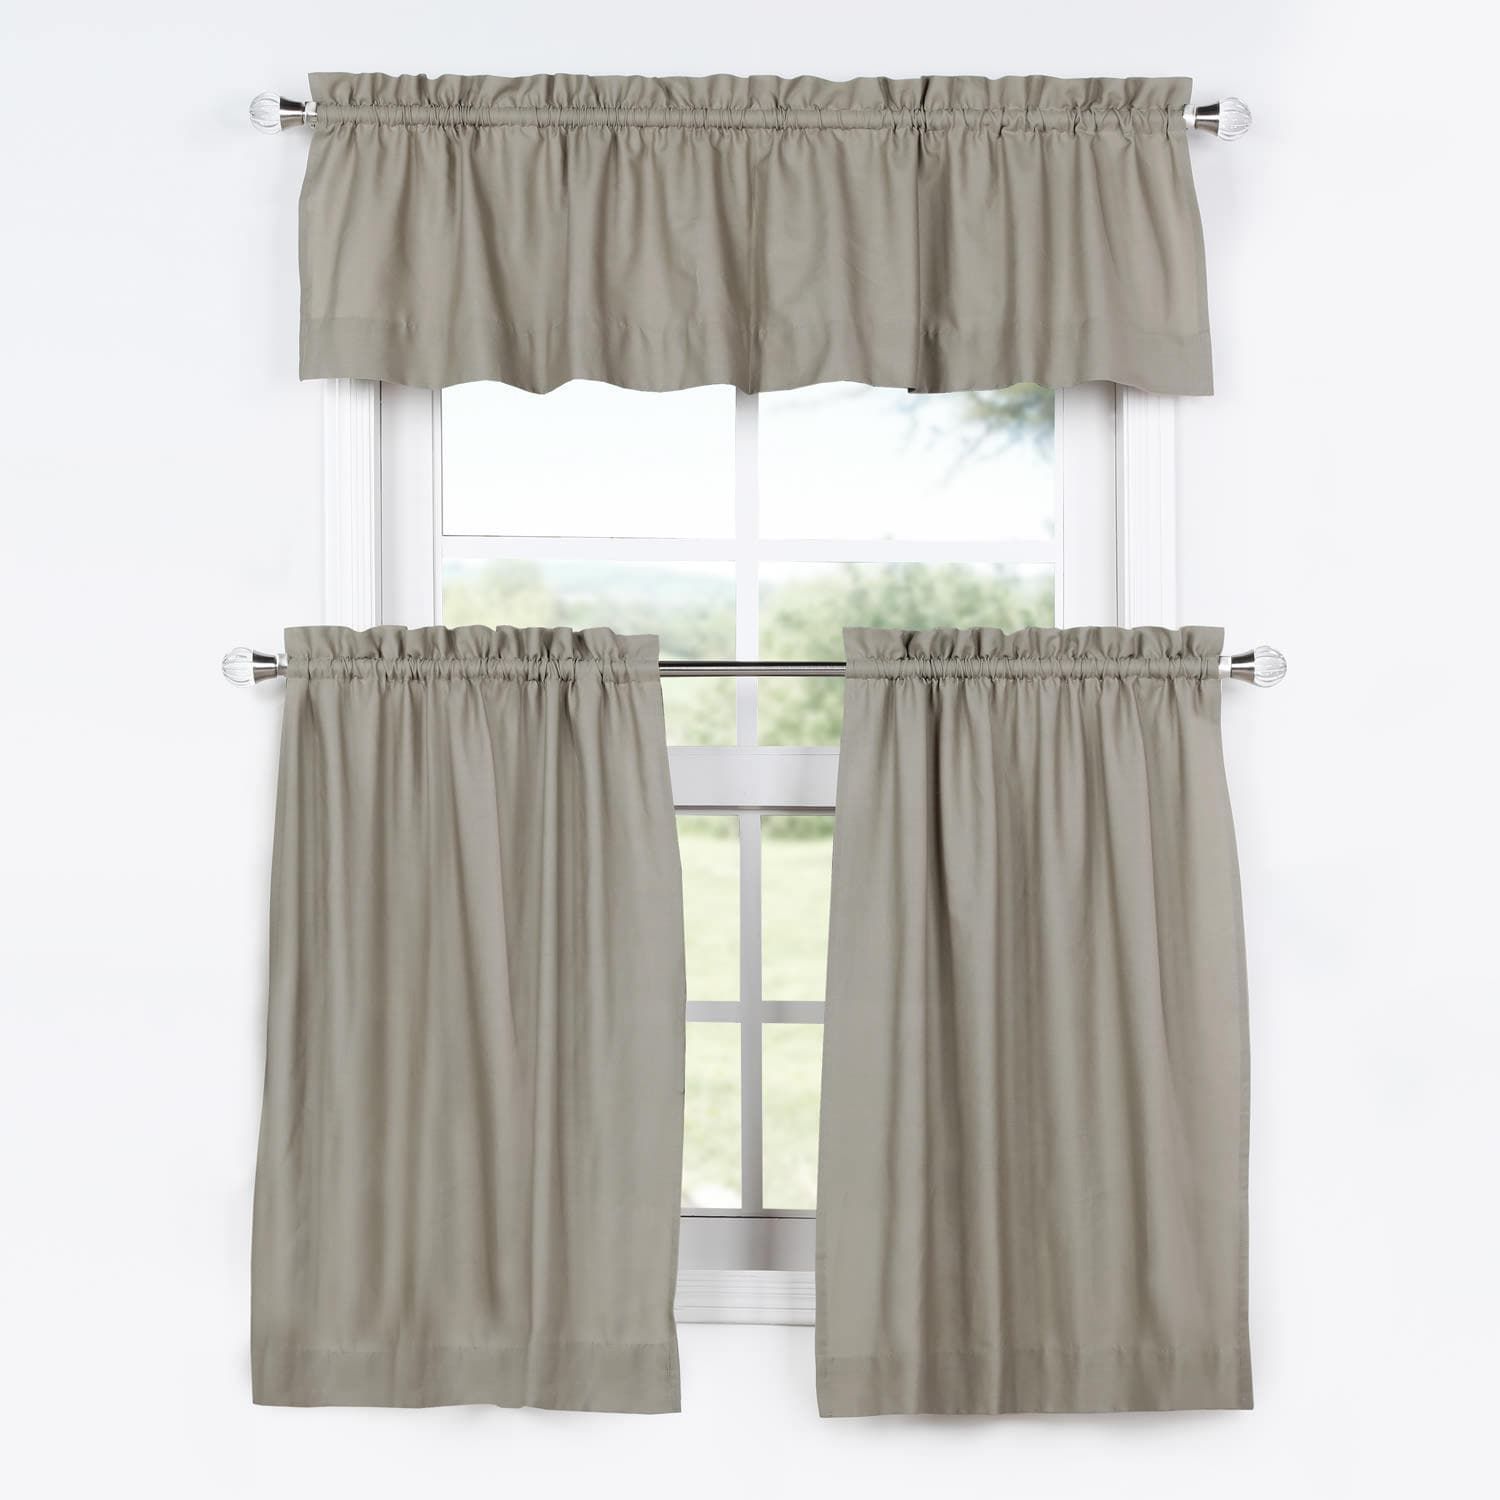 Millstone Gray Solid Cotton Kitchen Tier Curtain & Valance In Grey Window Curtain Tier And Valance Sets (View 14 of 20)